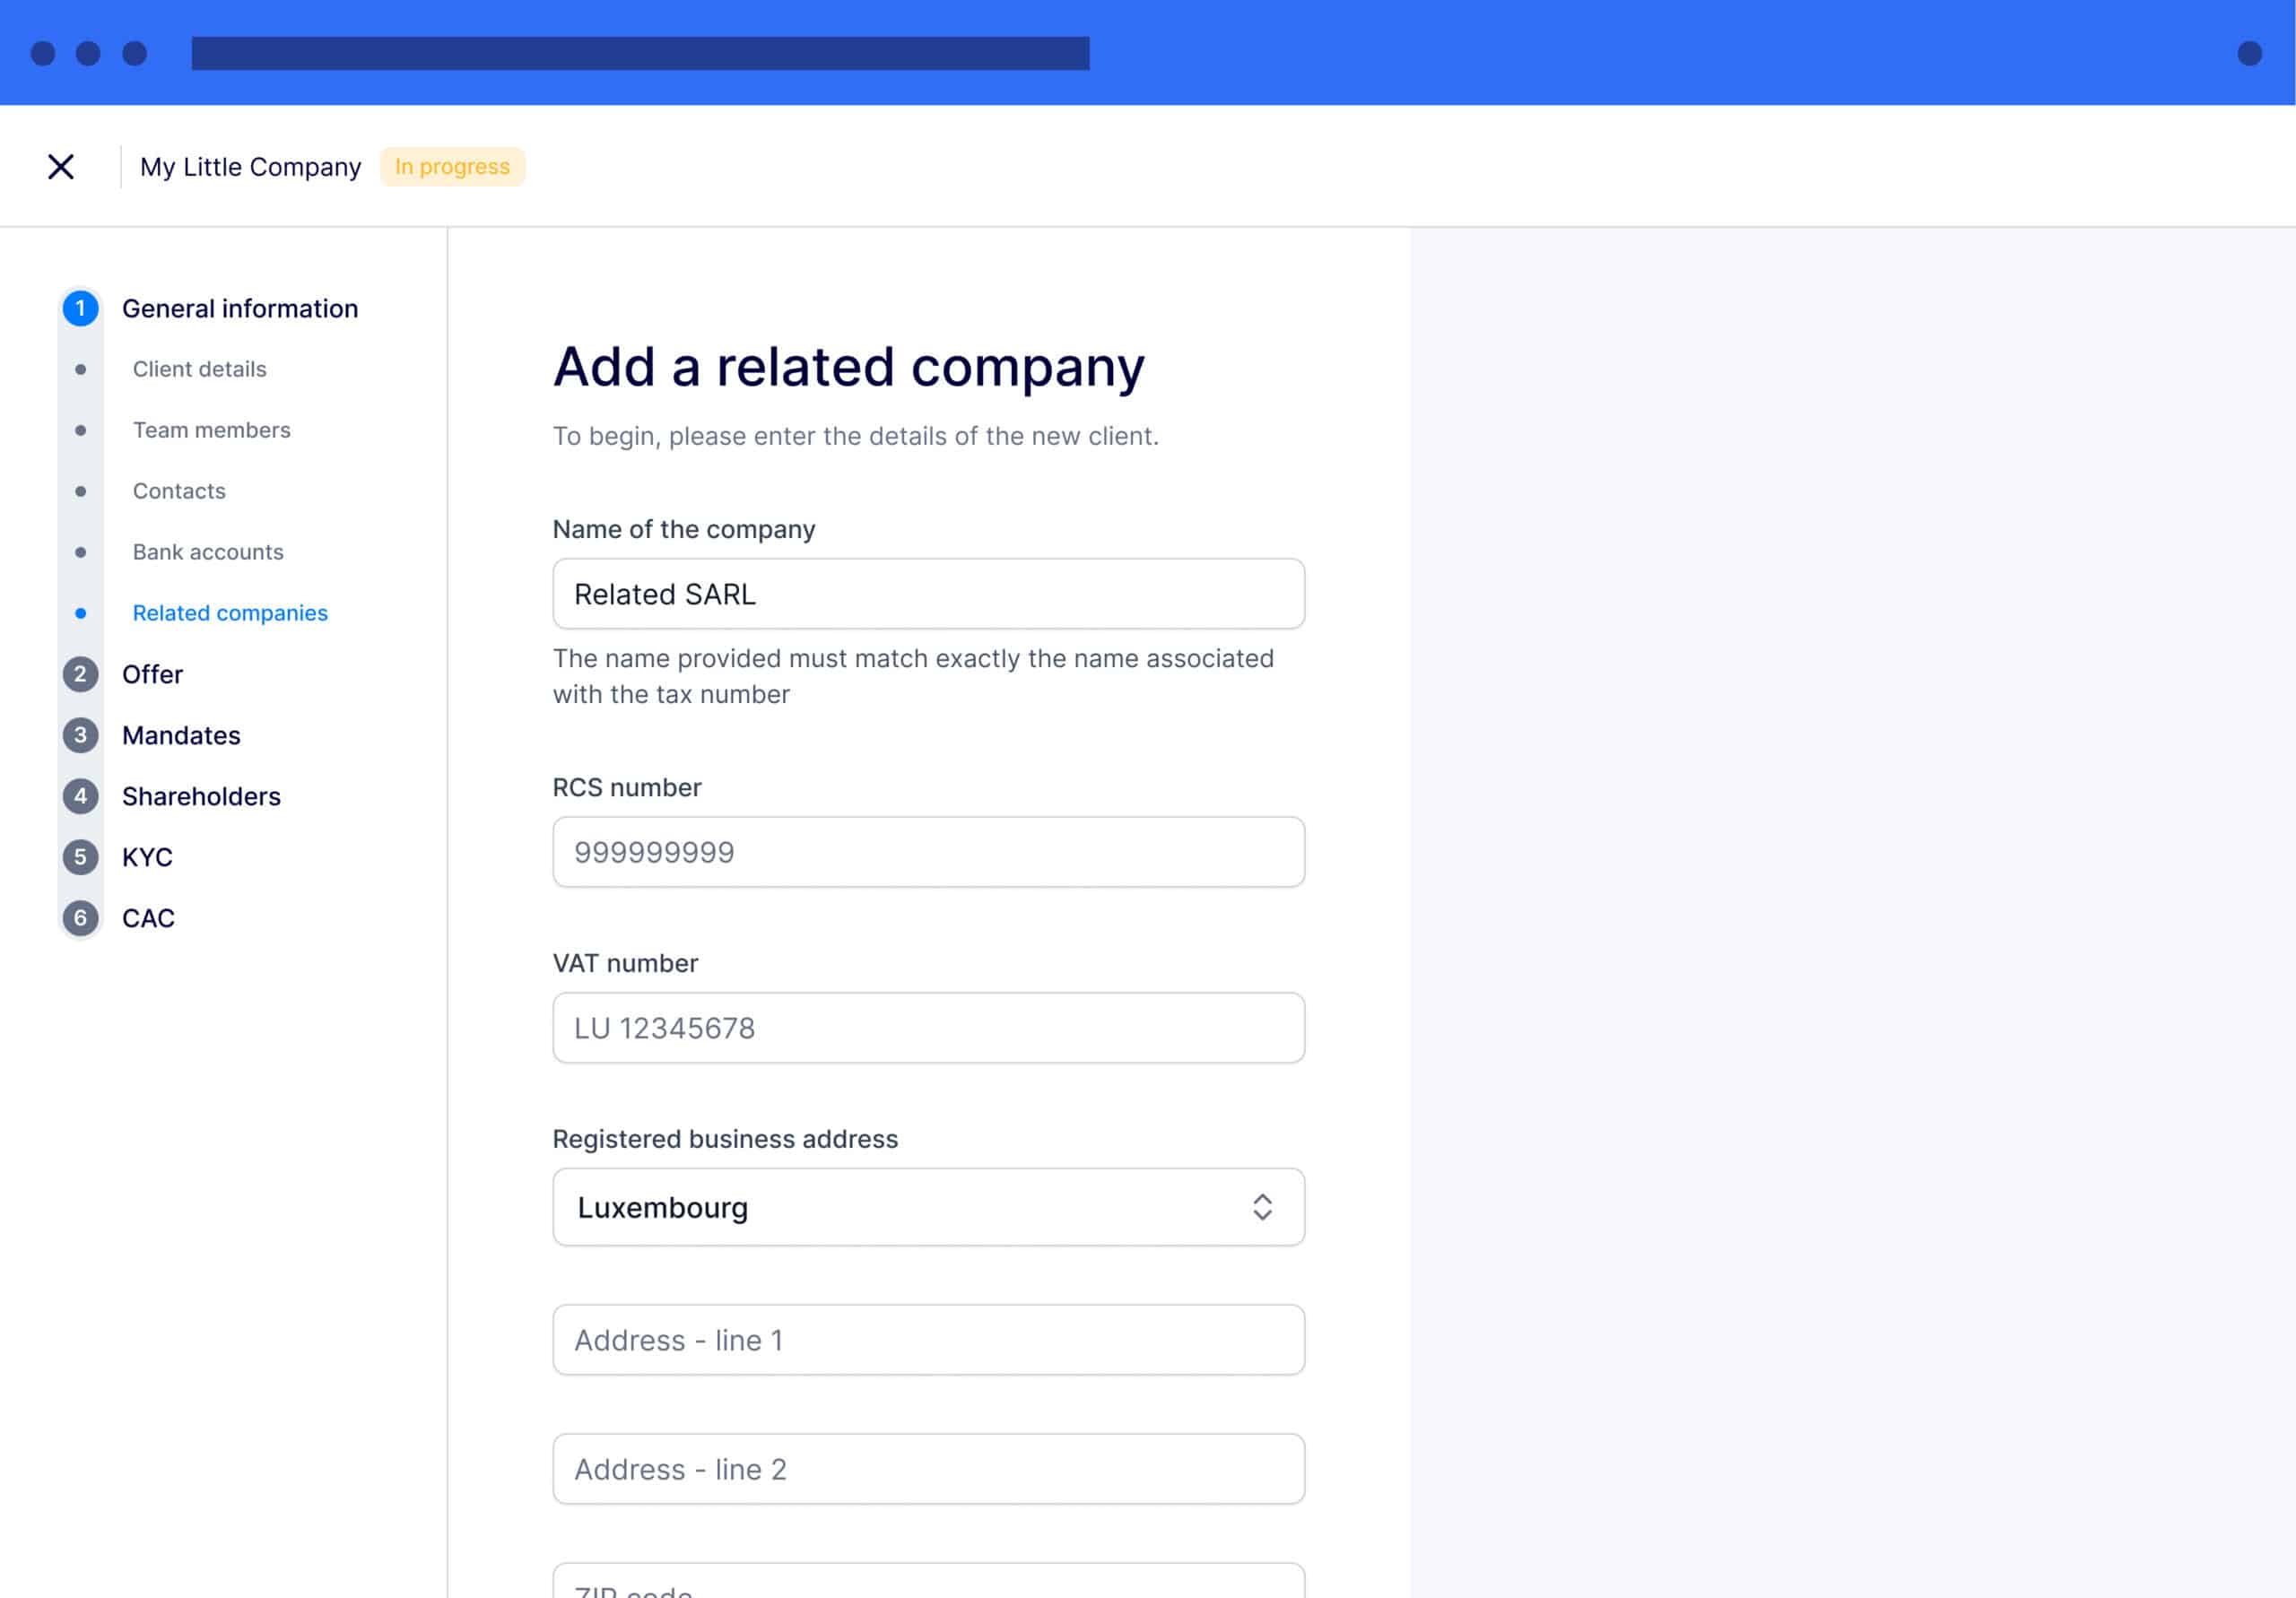 New Onboarding - Step 1.5 - Add a related company